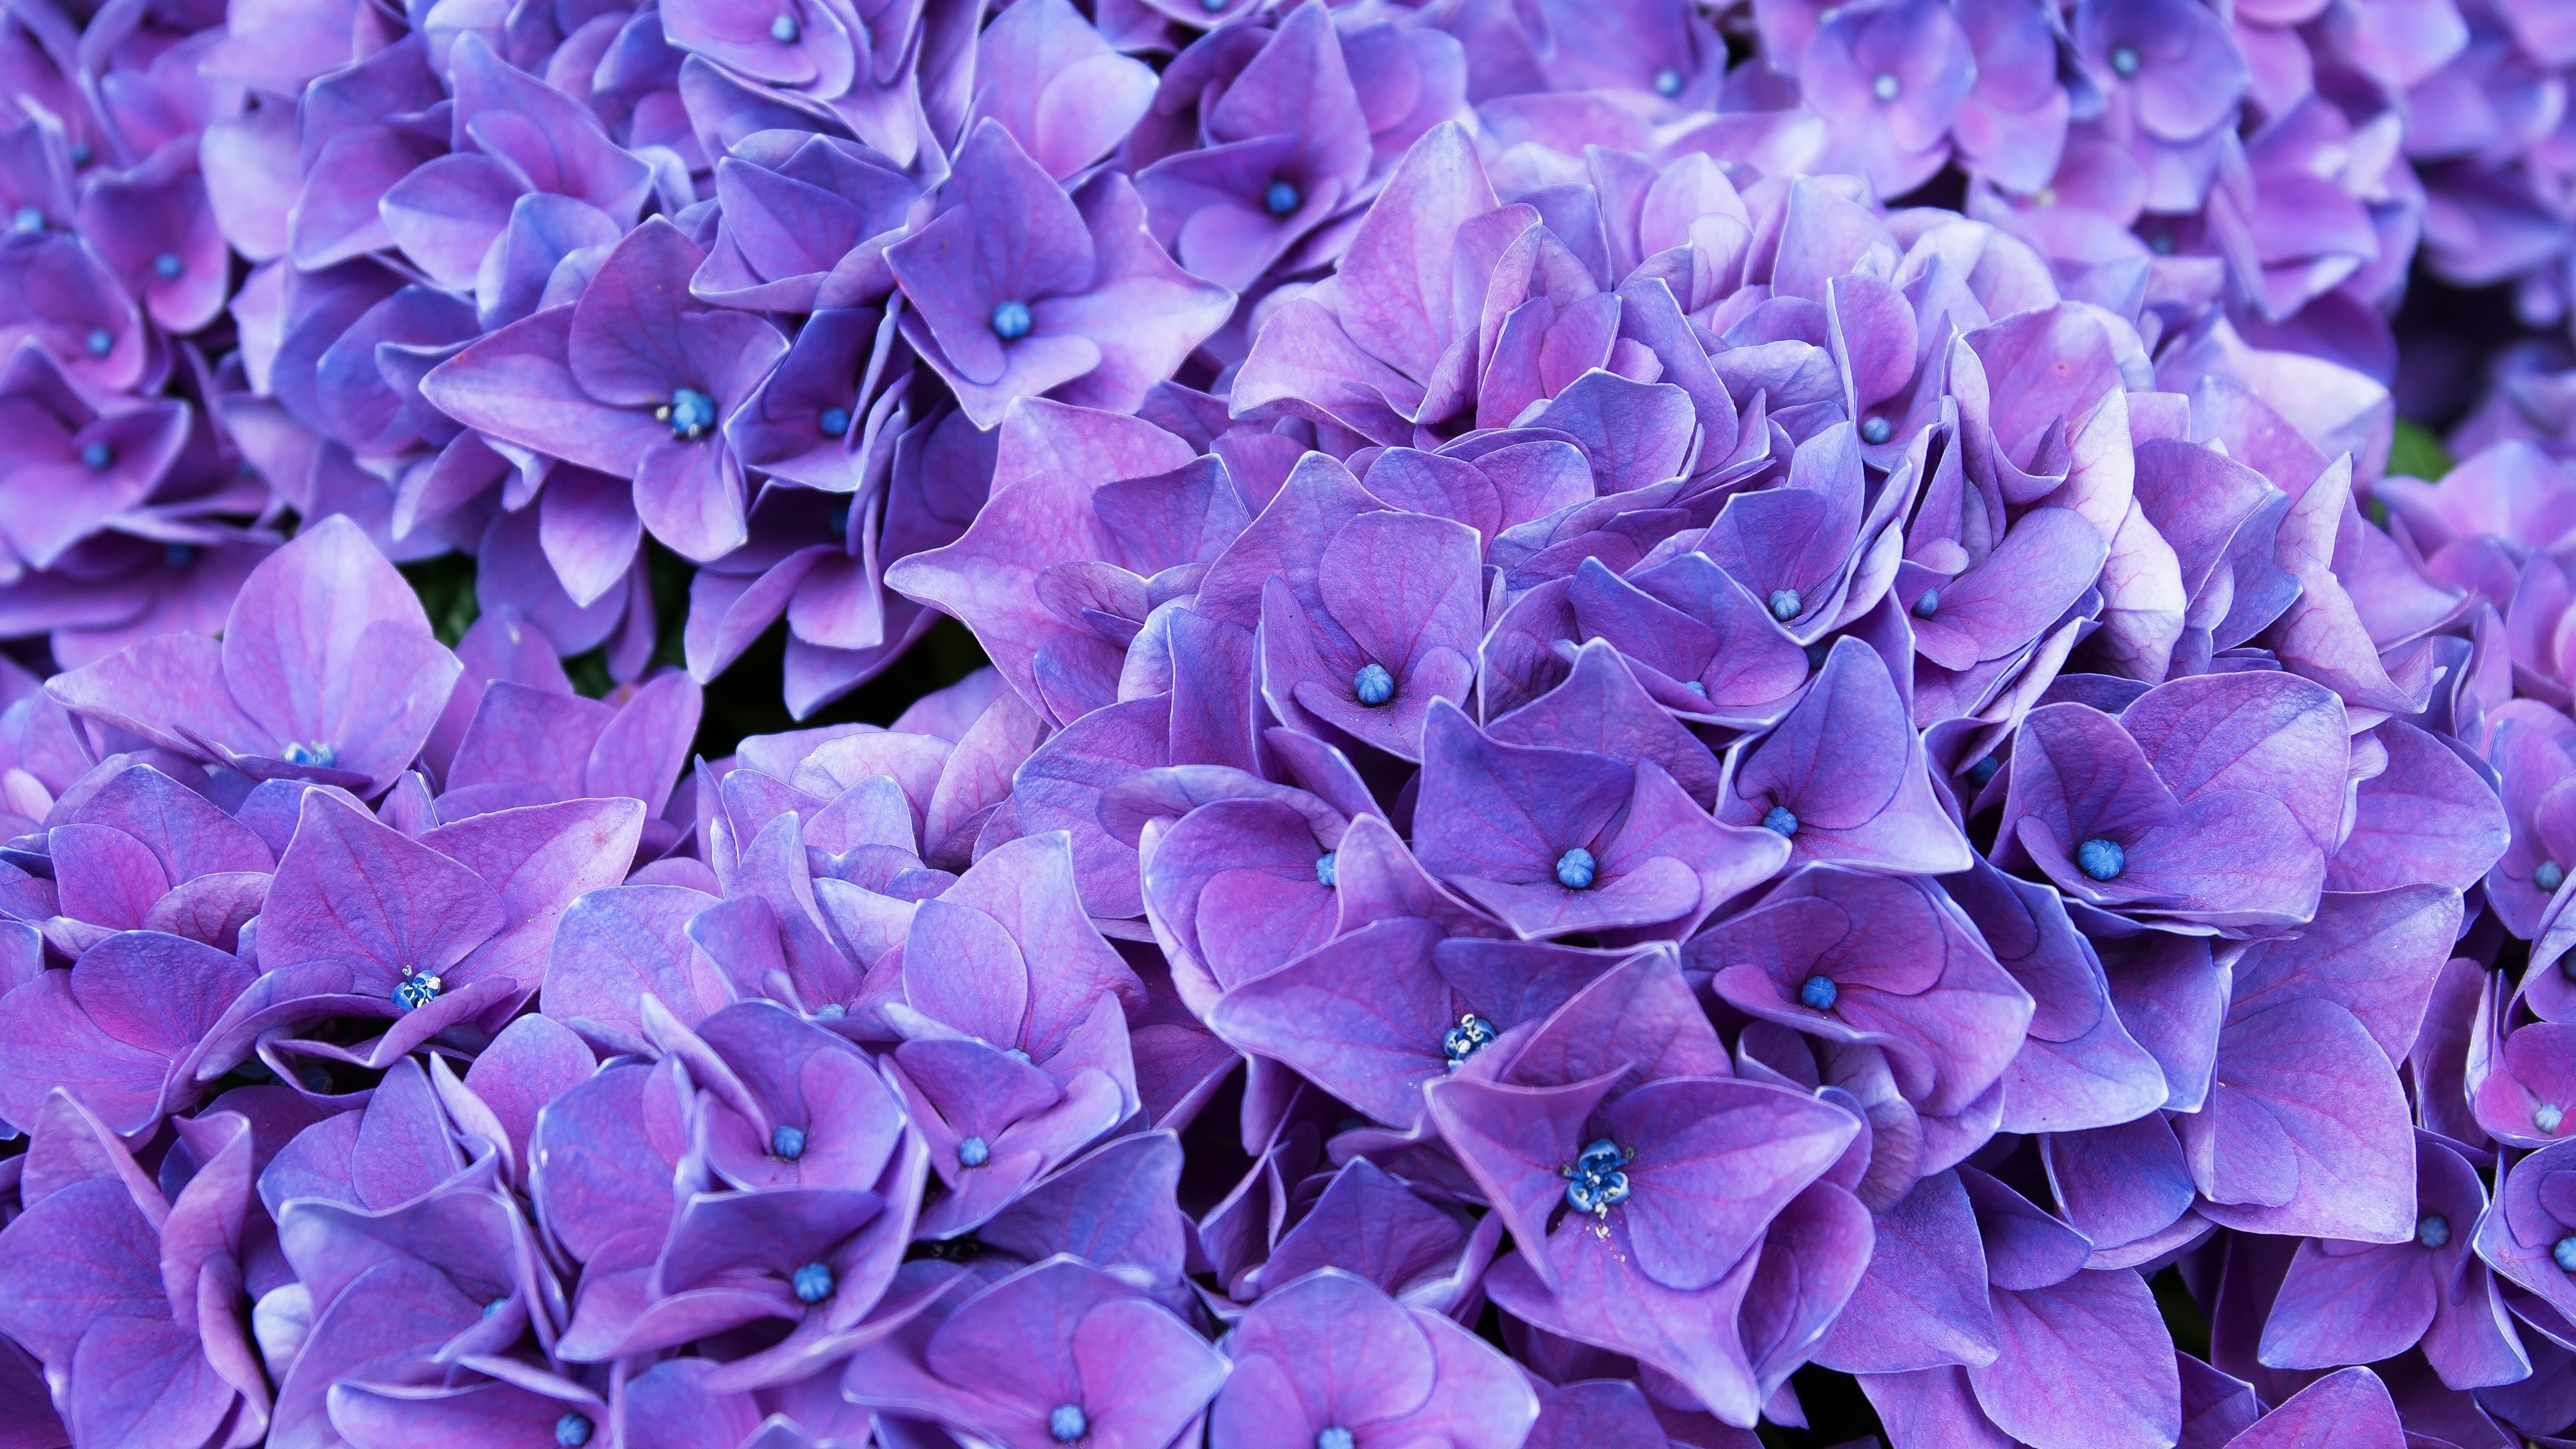 HD Wallpaper for theme: violet HD wallpaper, background